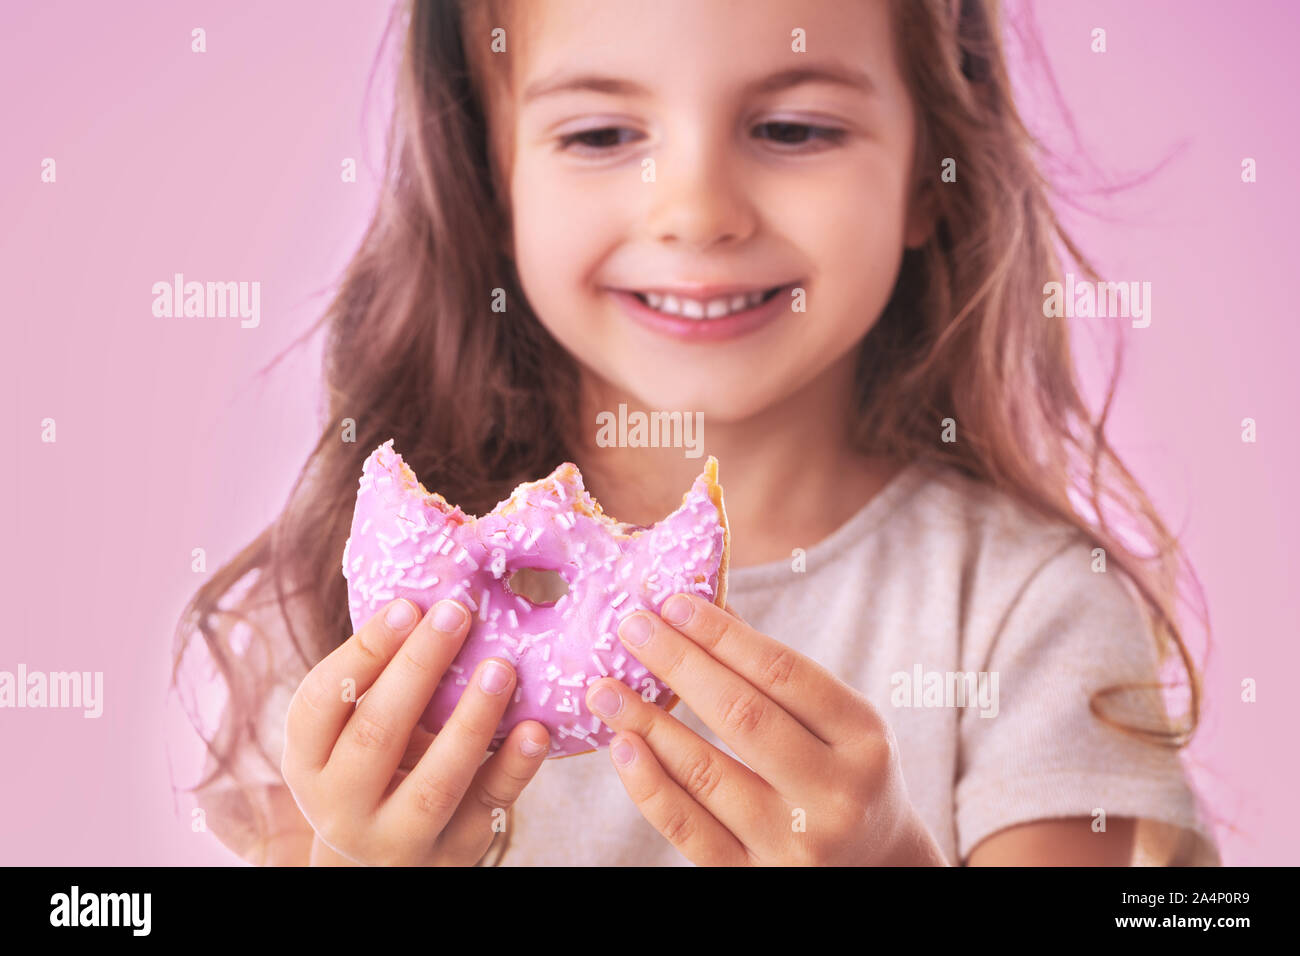 Happy little girl eating pink donut on pink background Stock Photo